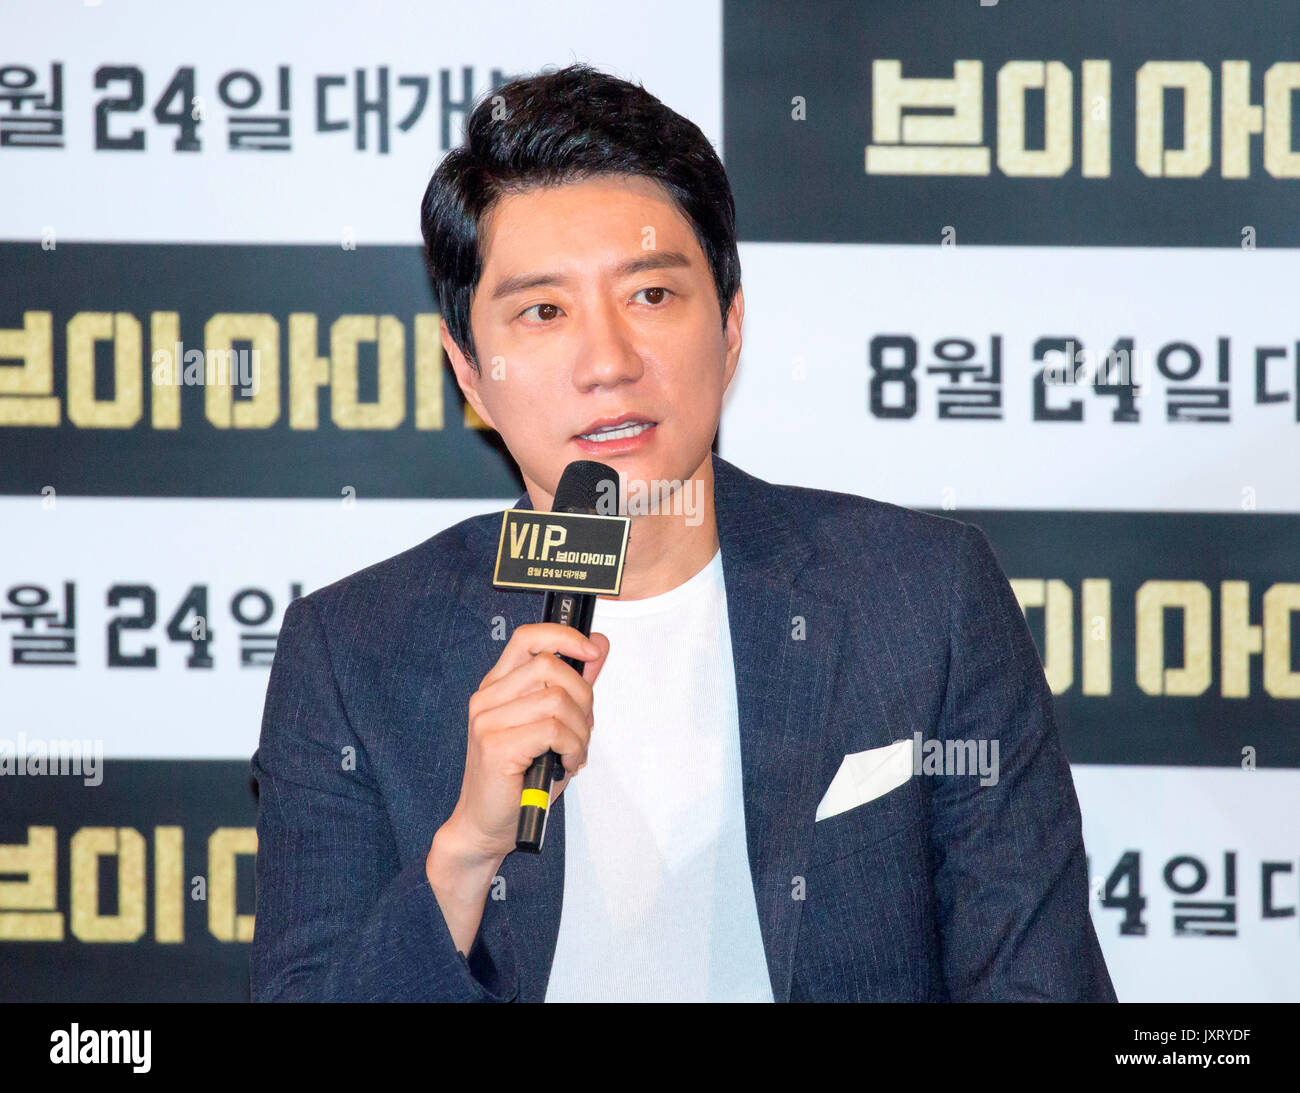 Kim Myung-min, Aug 16, 2017 : South Korean actor Kim Myung-min attends a press preview of his new movie, V.I.P. in Seoul, South Korea. Credit: Lee Jae-Won/AFLO/Alamy Live News Stock Photo